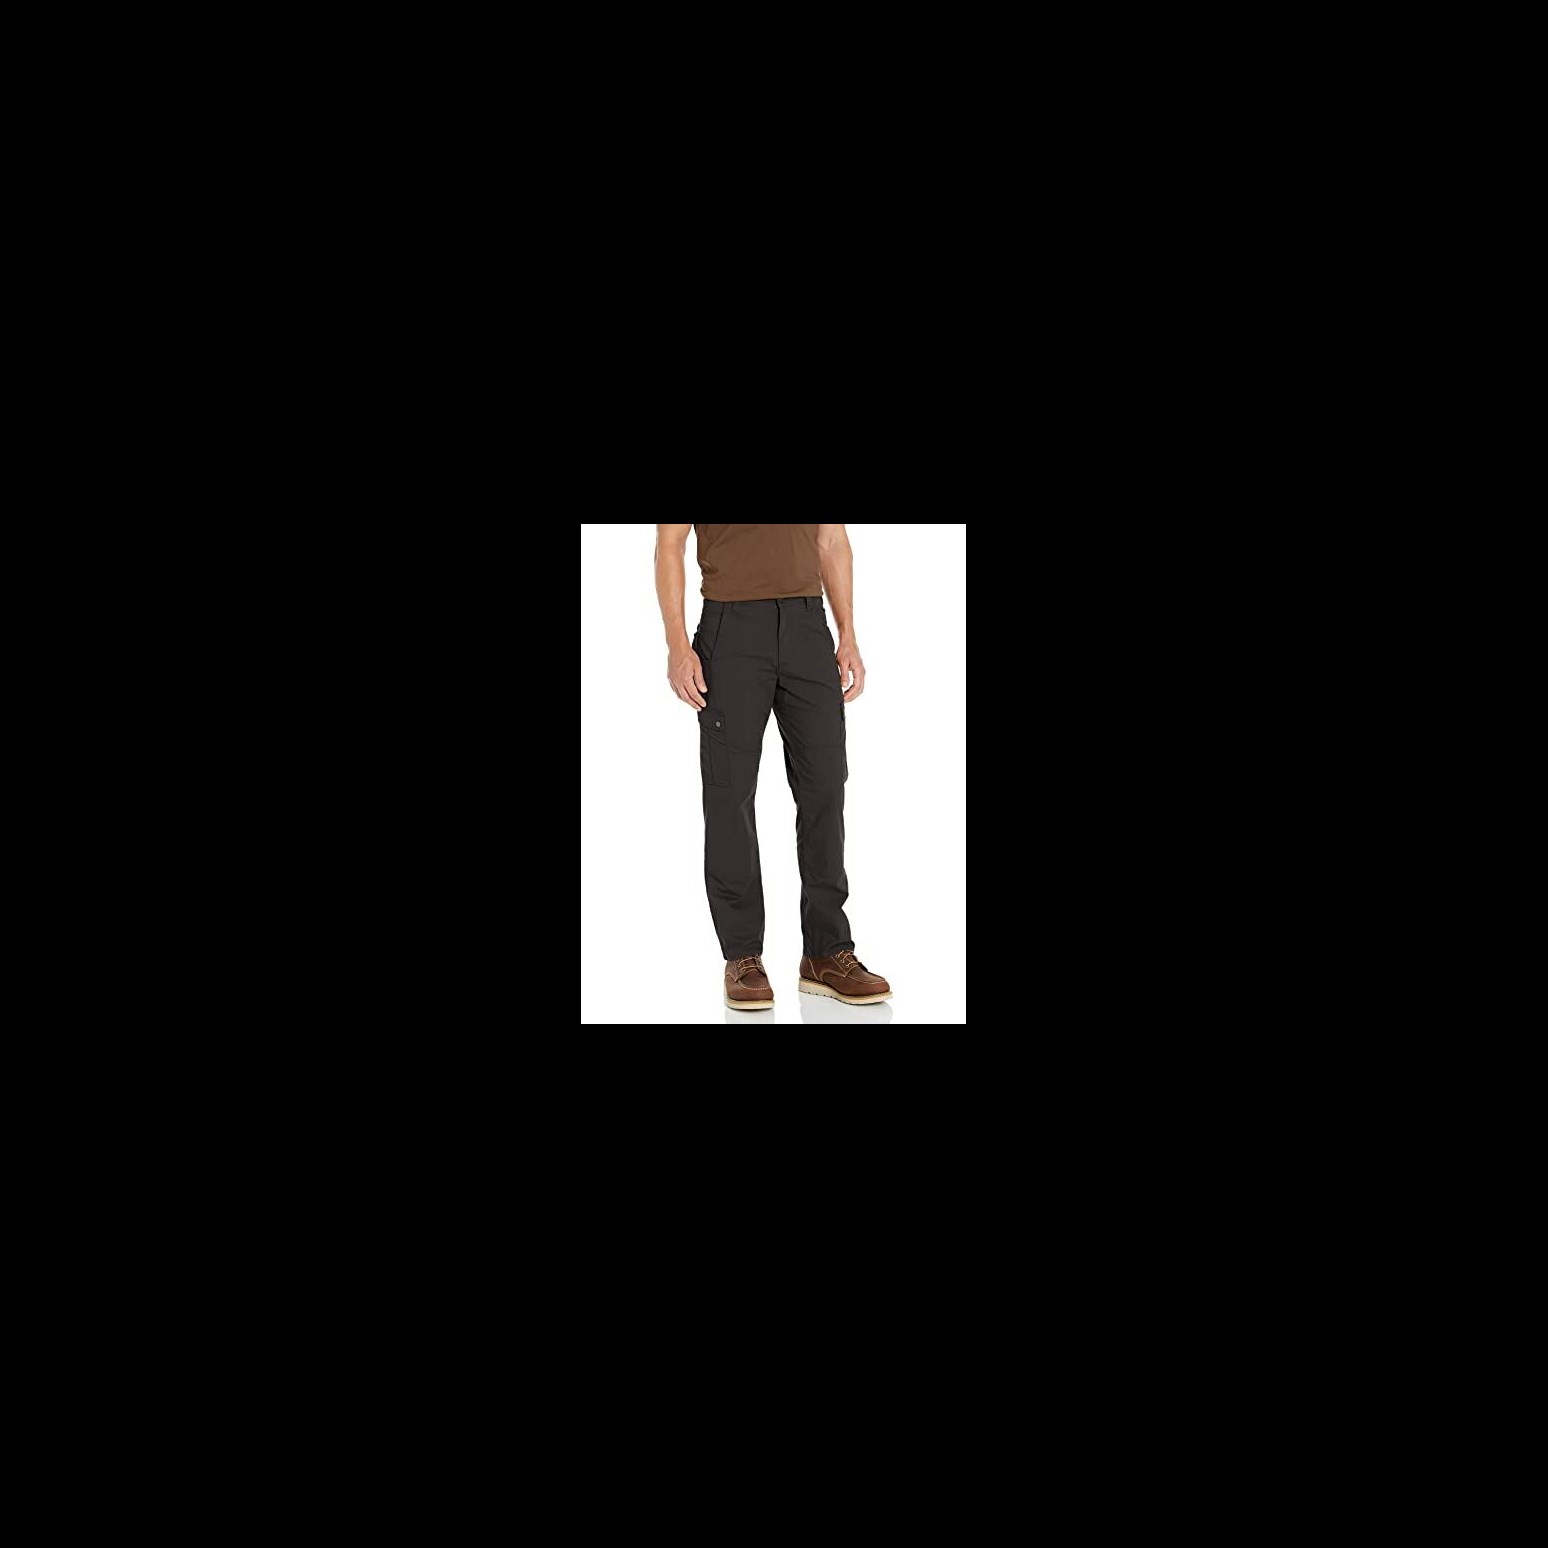 Carhartt Men's Rugged Flex® Relaxed Fit Ripstop Cargo Work Pant in Black -  Pants, Carhartt